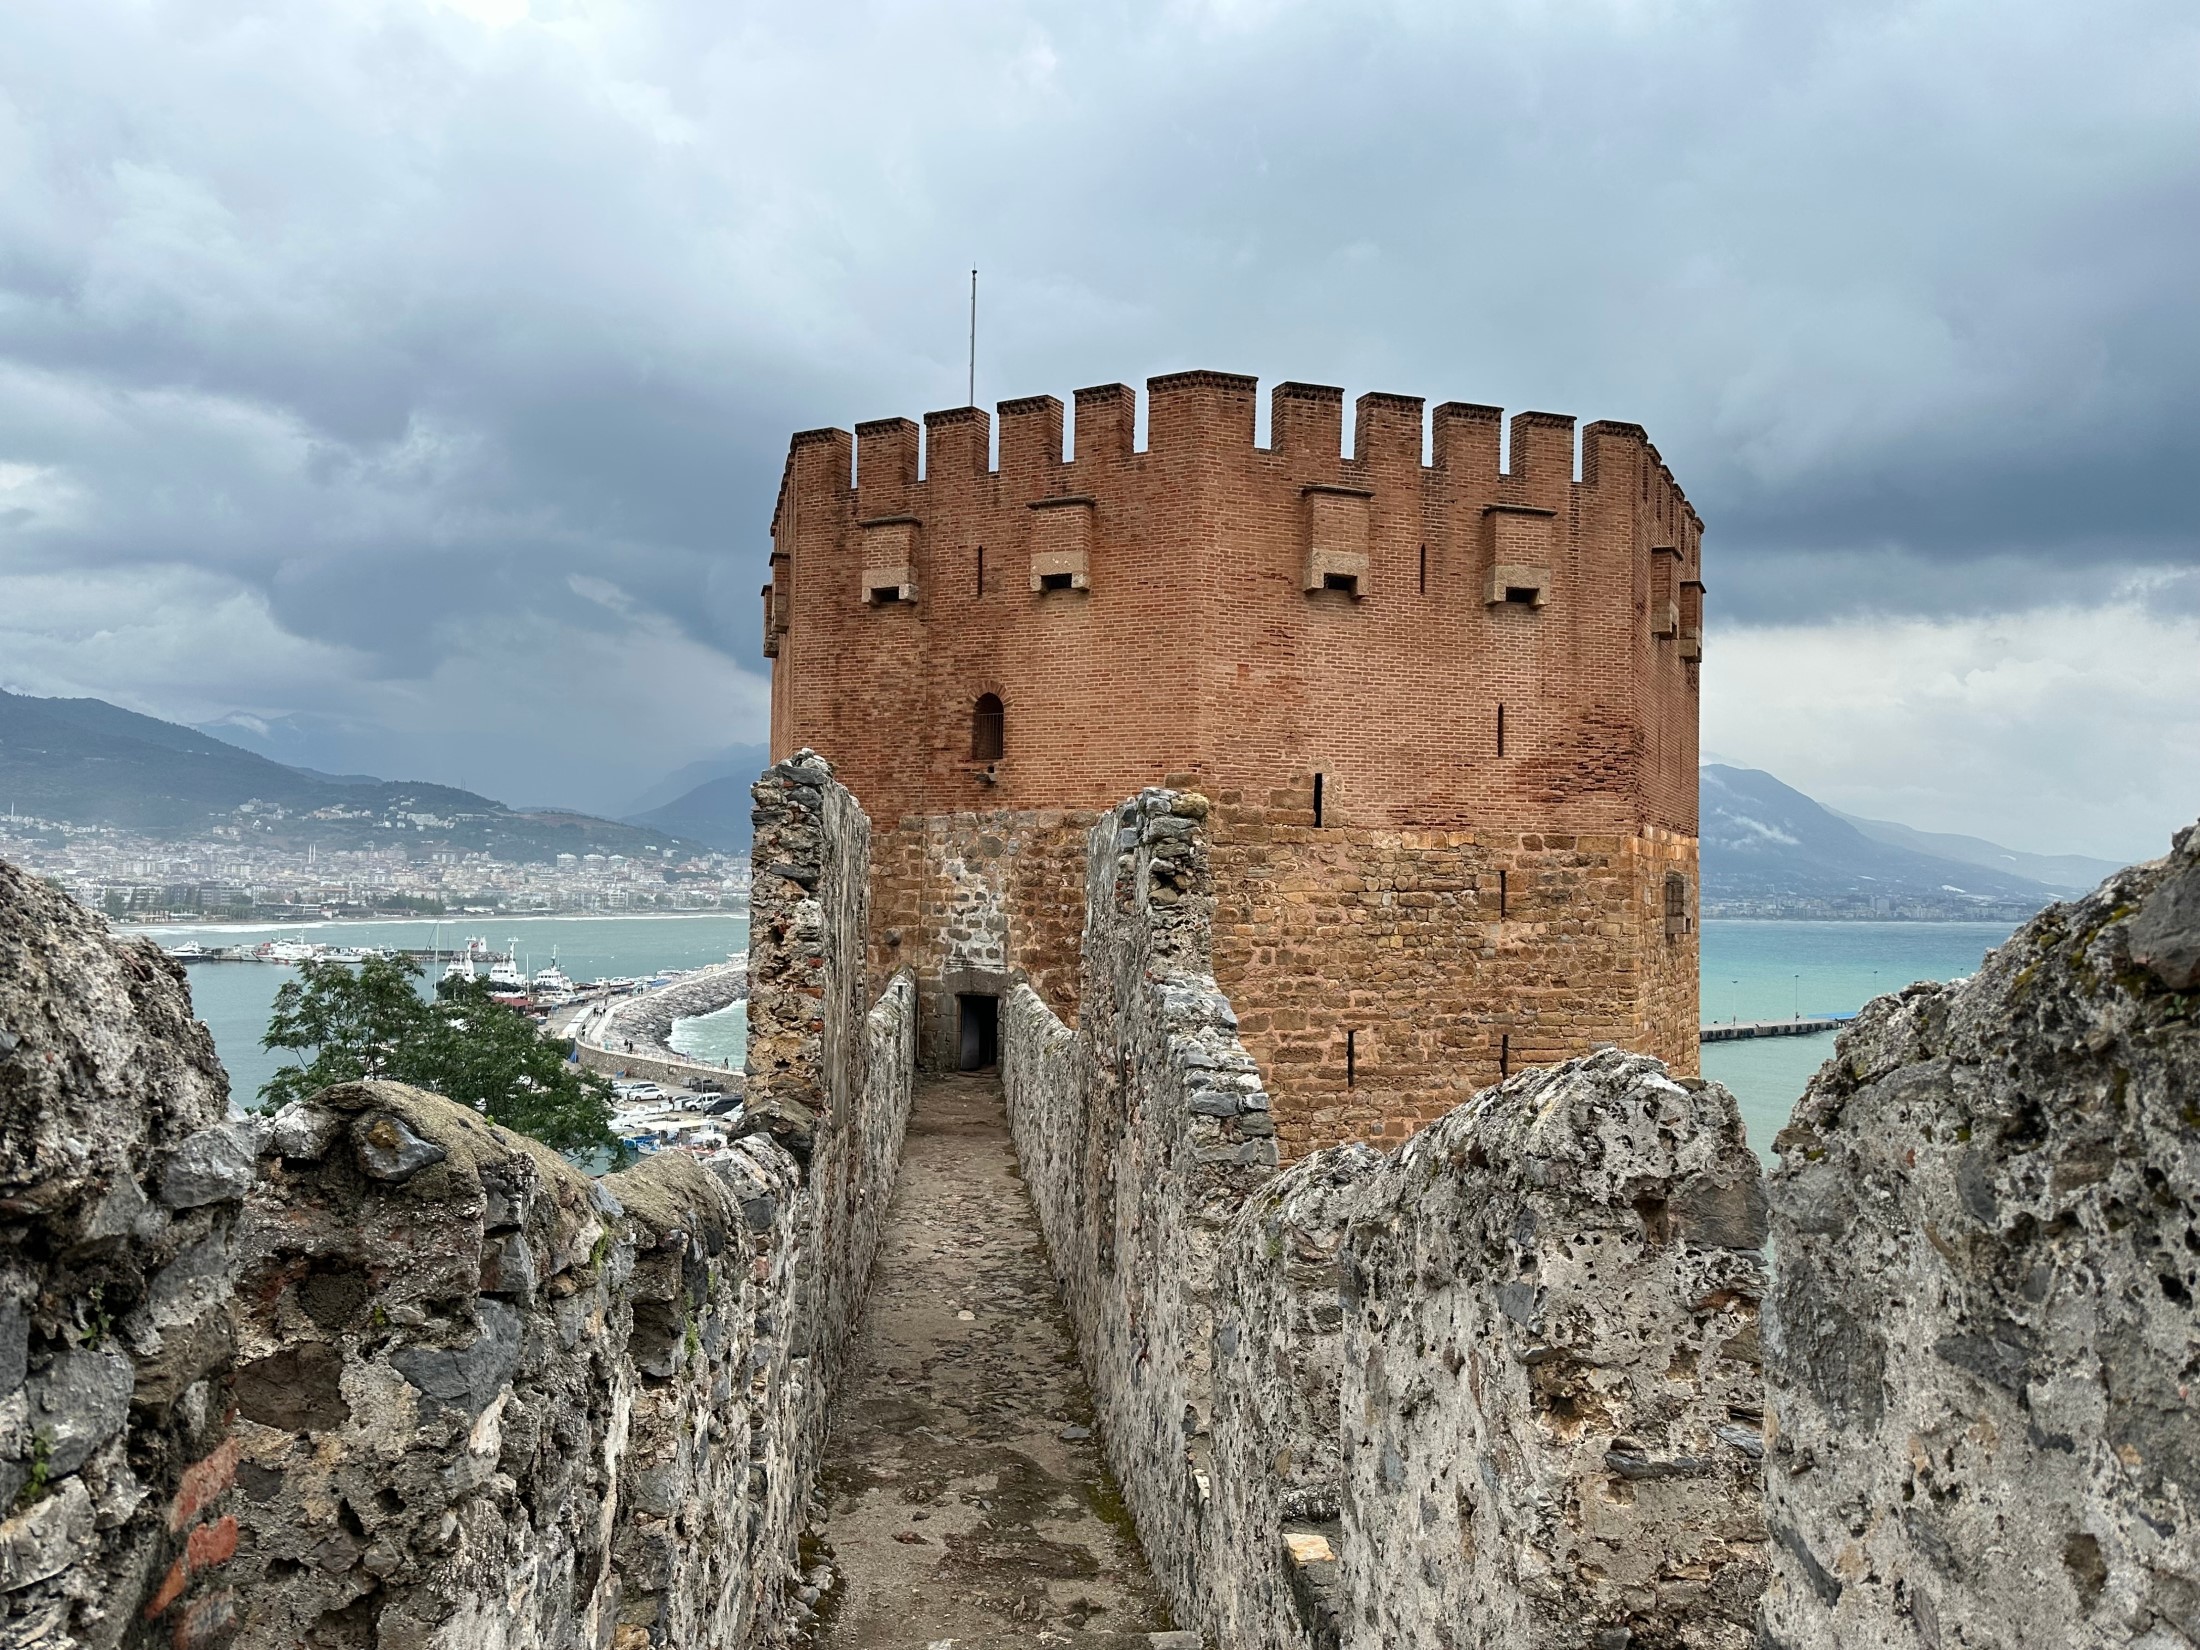 Antalya, Alanya, Turkey, Kızıl Kule - The historical Red Tower, which is the symbol of the city.